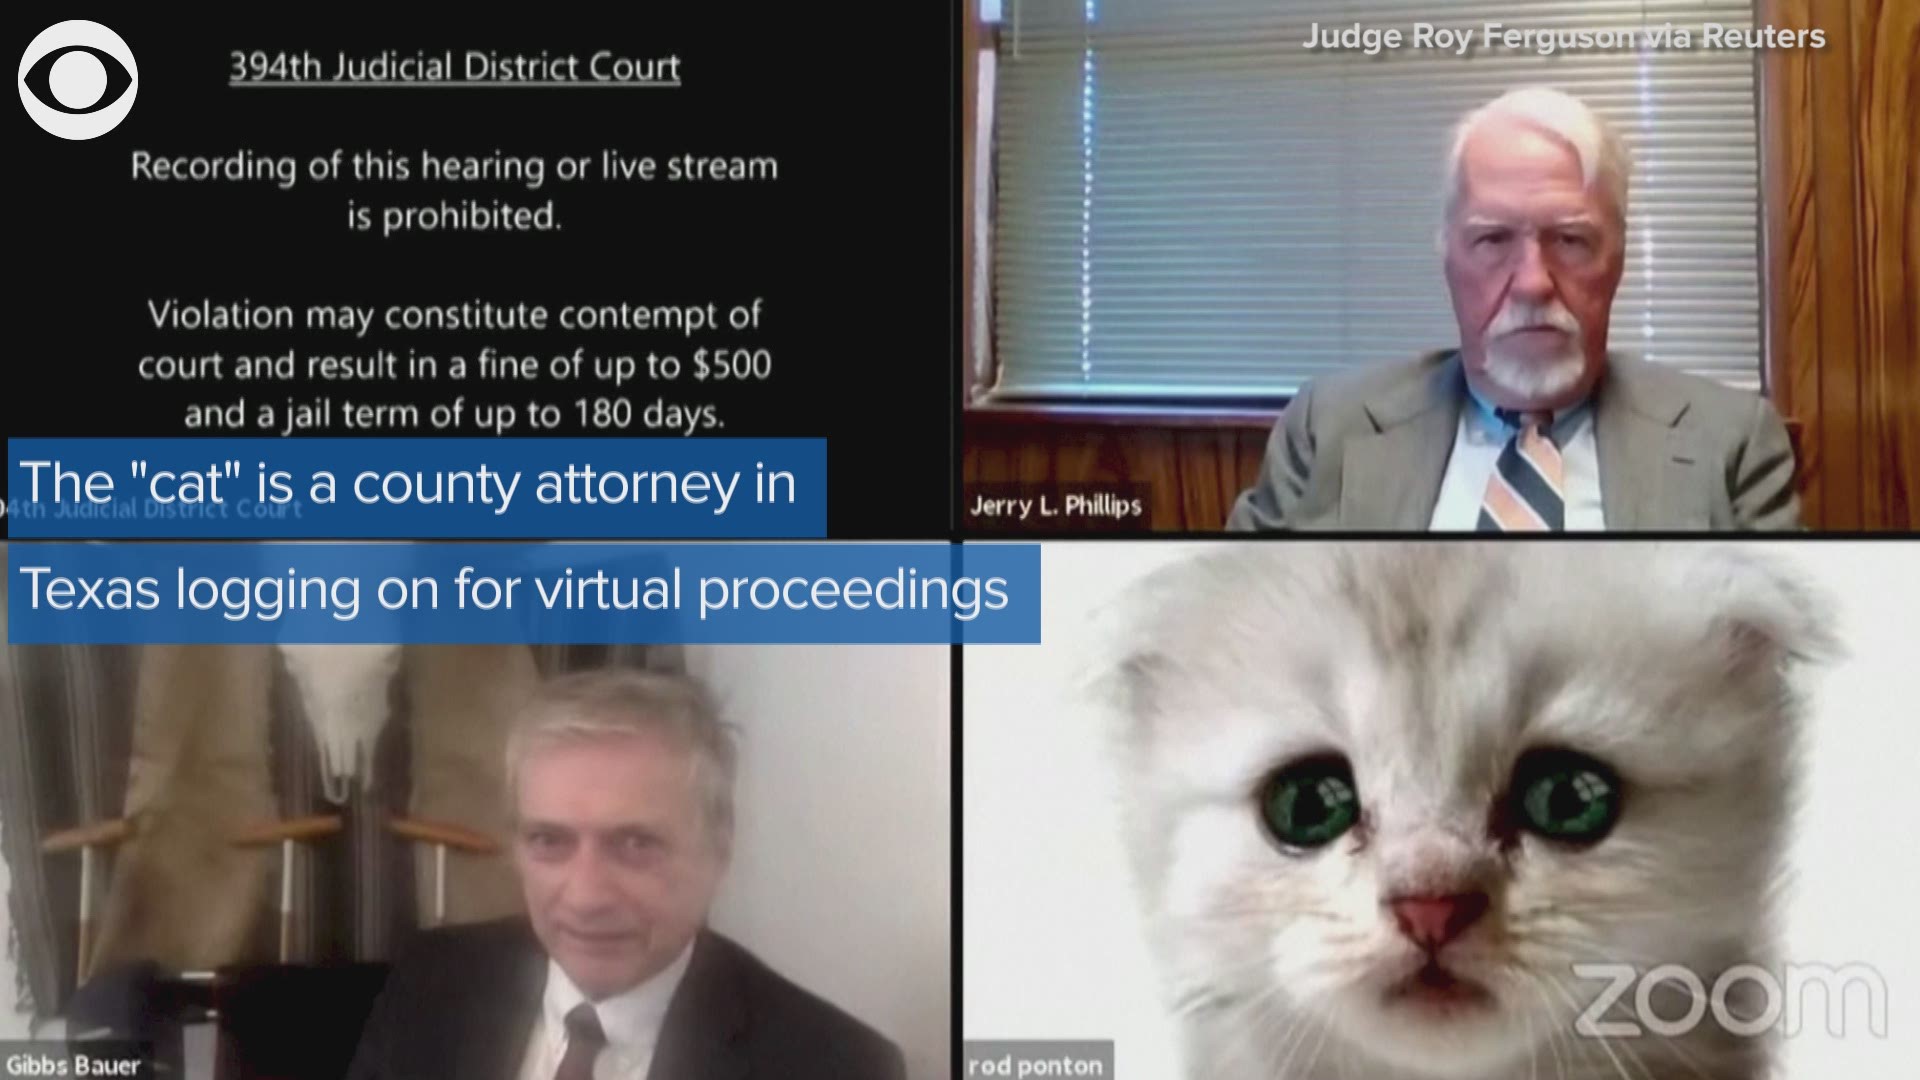 “I’m here live. I’m not a cat,” the attorney said when he realized a cute kitten filter had replaced his face on the call. No kitten? Thanks for clarifying.